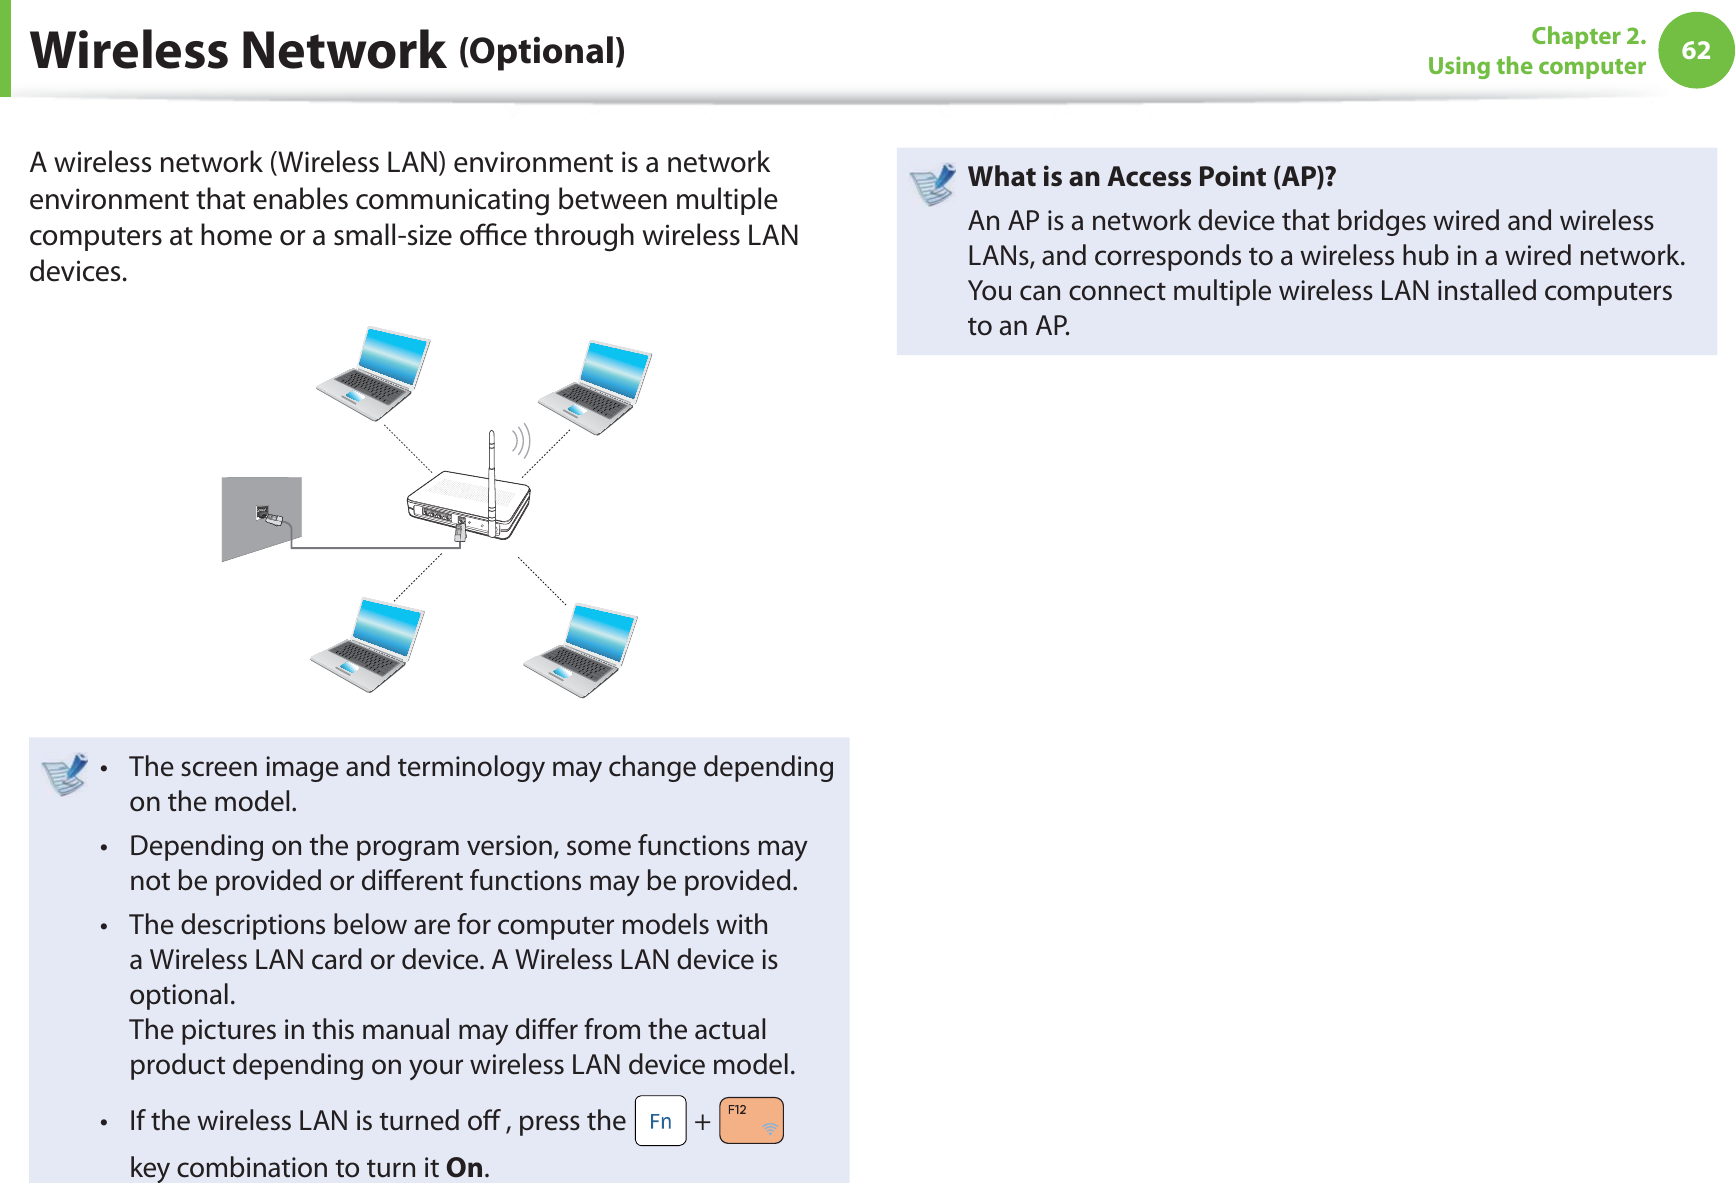 62Chapter 2. Using the computerA wireless network (Wireless LAN) environment is a network environment that enables communicating between multiple computers at home or a small-size oﬃ  ce through wireless LAN devices.The screen image and terminology may change depending t on the model.Depending on the program version, some functions may t not be provided or diﬀ erent functions may be provided.The descriptions below are for computer models with t a Wireless LAN card or device. A Wireless LAN device is optional.The pictures in this manual may diﬀ er from the actual product depending on your wireless LAN device model.If the wireless LAN is turned oﬀ  , press the t  +   key combination to turn it On.  What is an Access Point ( AP)?An AP is a network device that bridges wired and wireless LANs, and corresponds to a wireless hub in a wired network. You can connect multiple wireless LAN installed computers to an AP. Wireless  Network  (Optional)